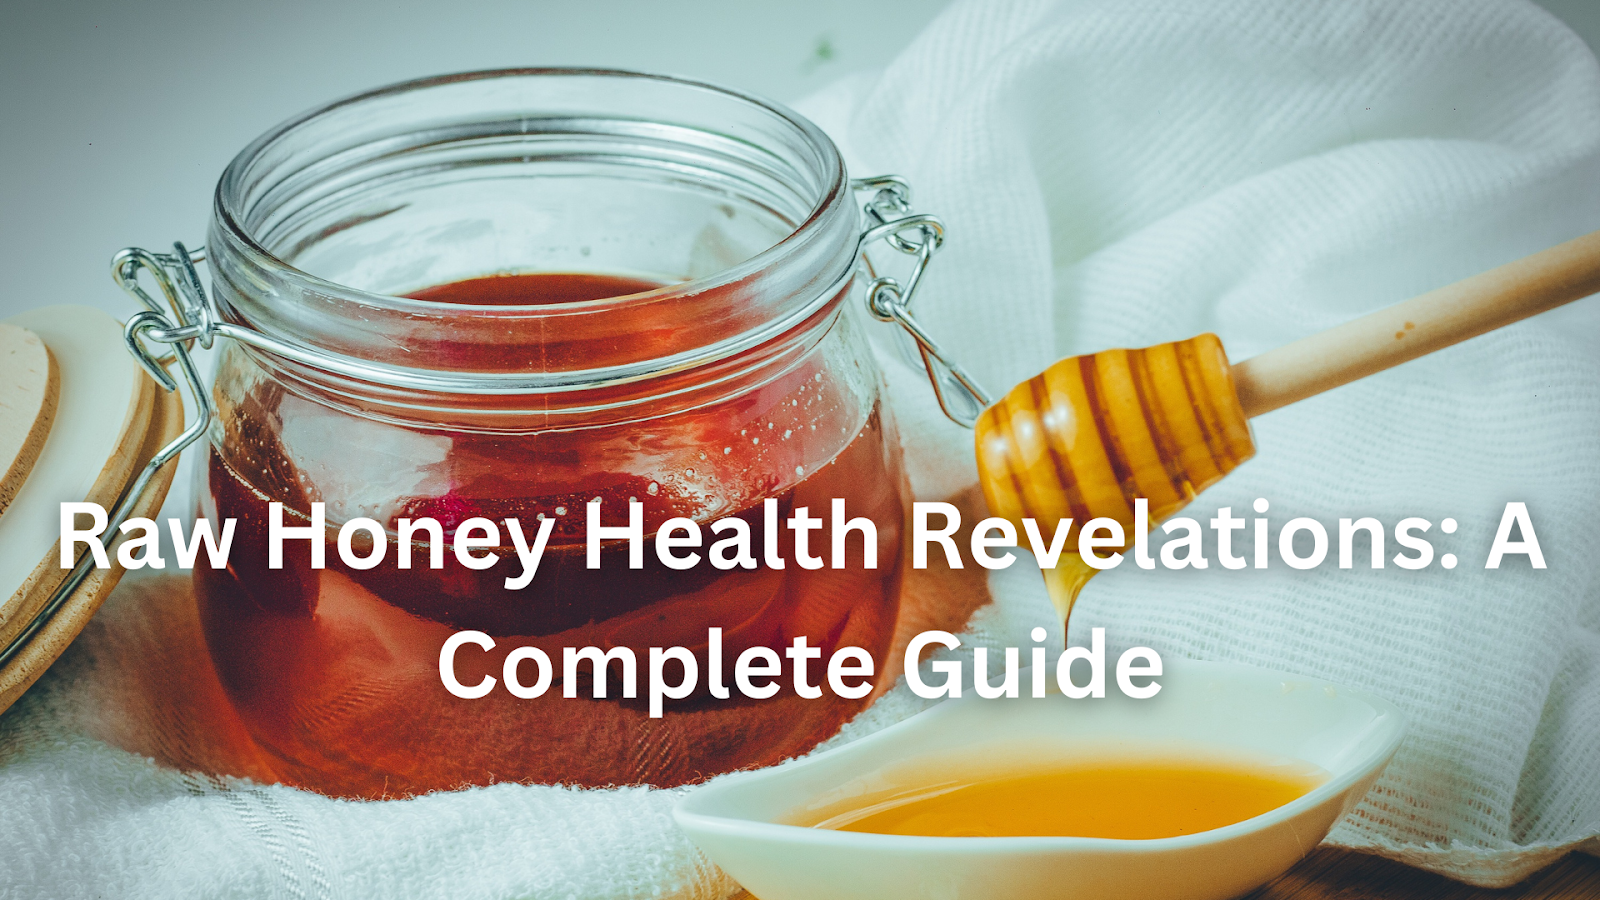 Title: Raw Honey Health Revelations: A Complete Guide

A picture of honey being scooped from a honey jar onto a small plate.